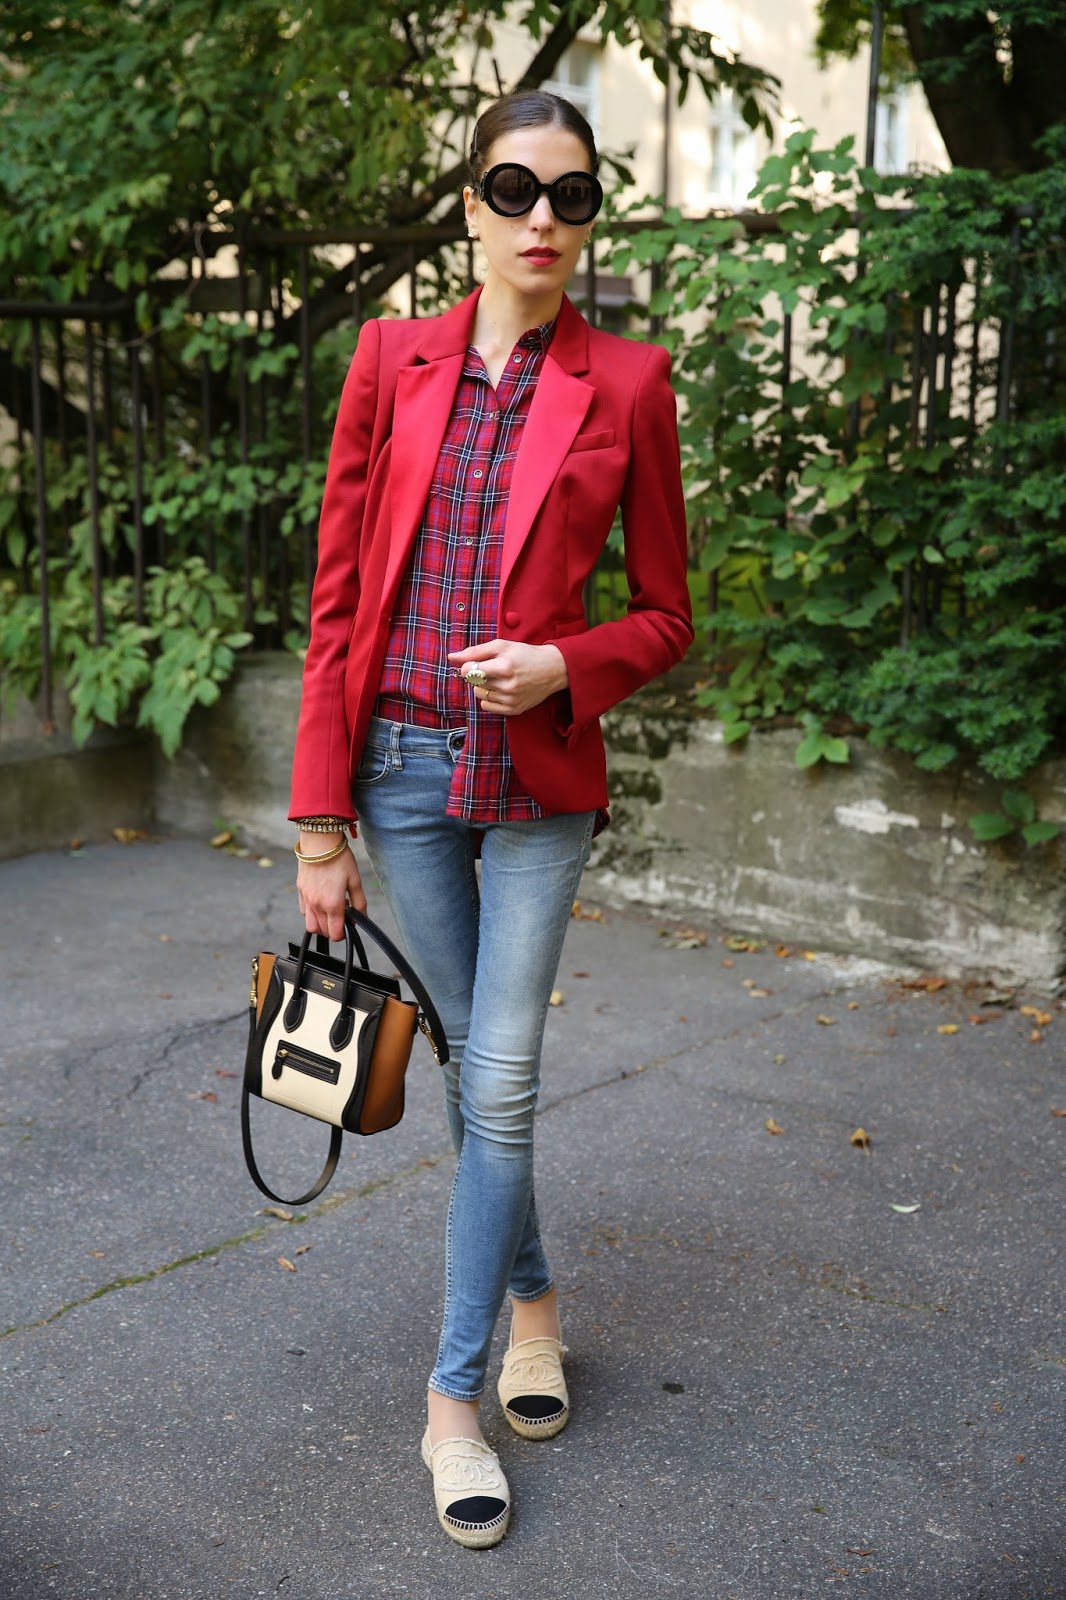 Outfit post - Red and plaid - L'ART OF FASHIONL'ART OF FASHION